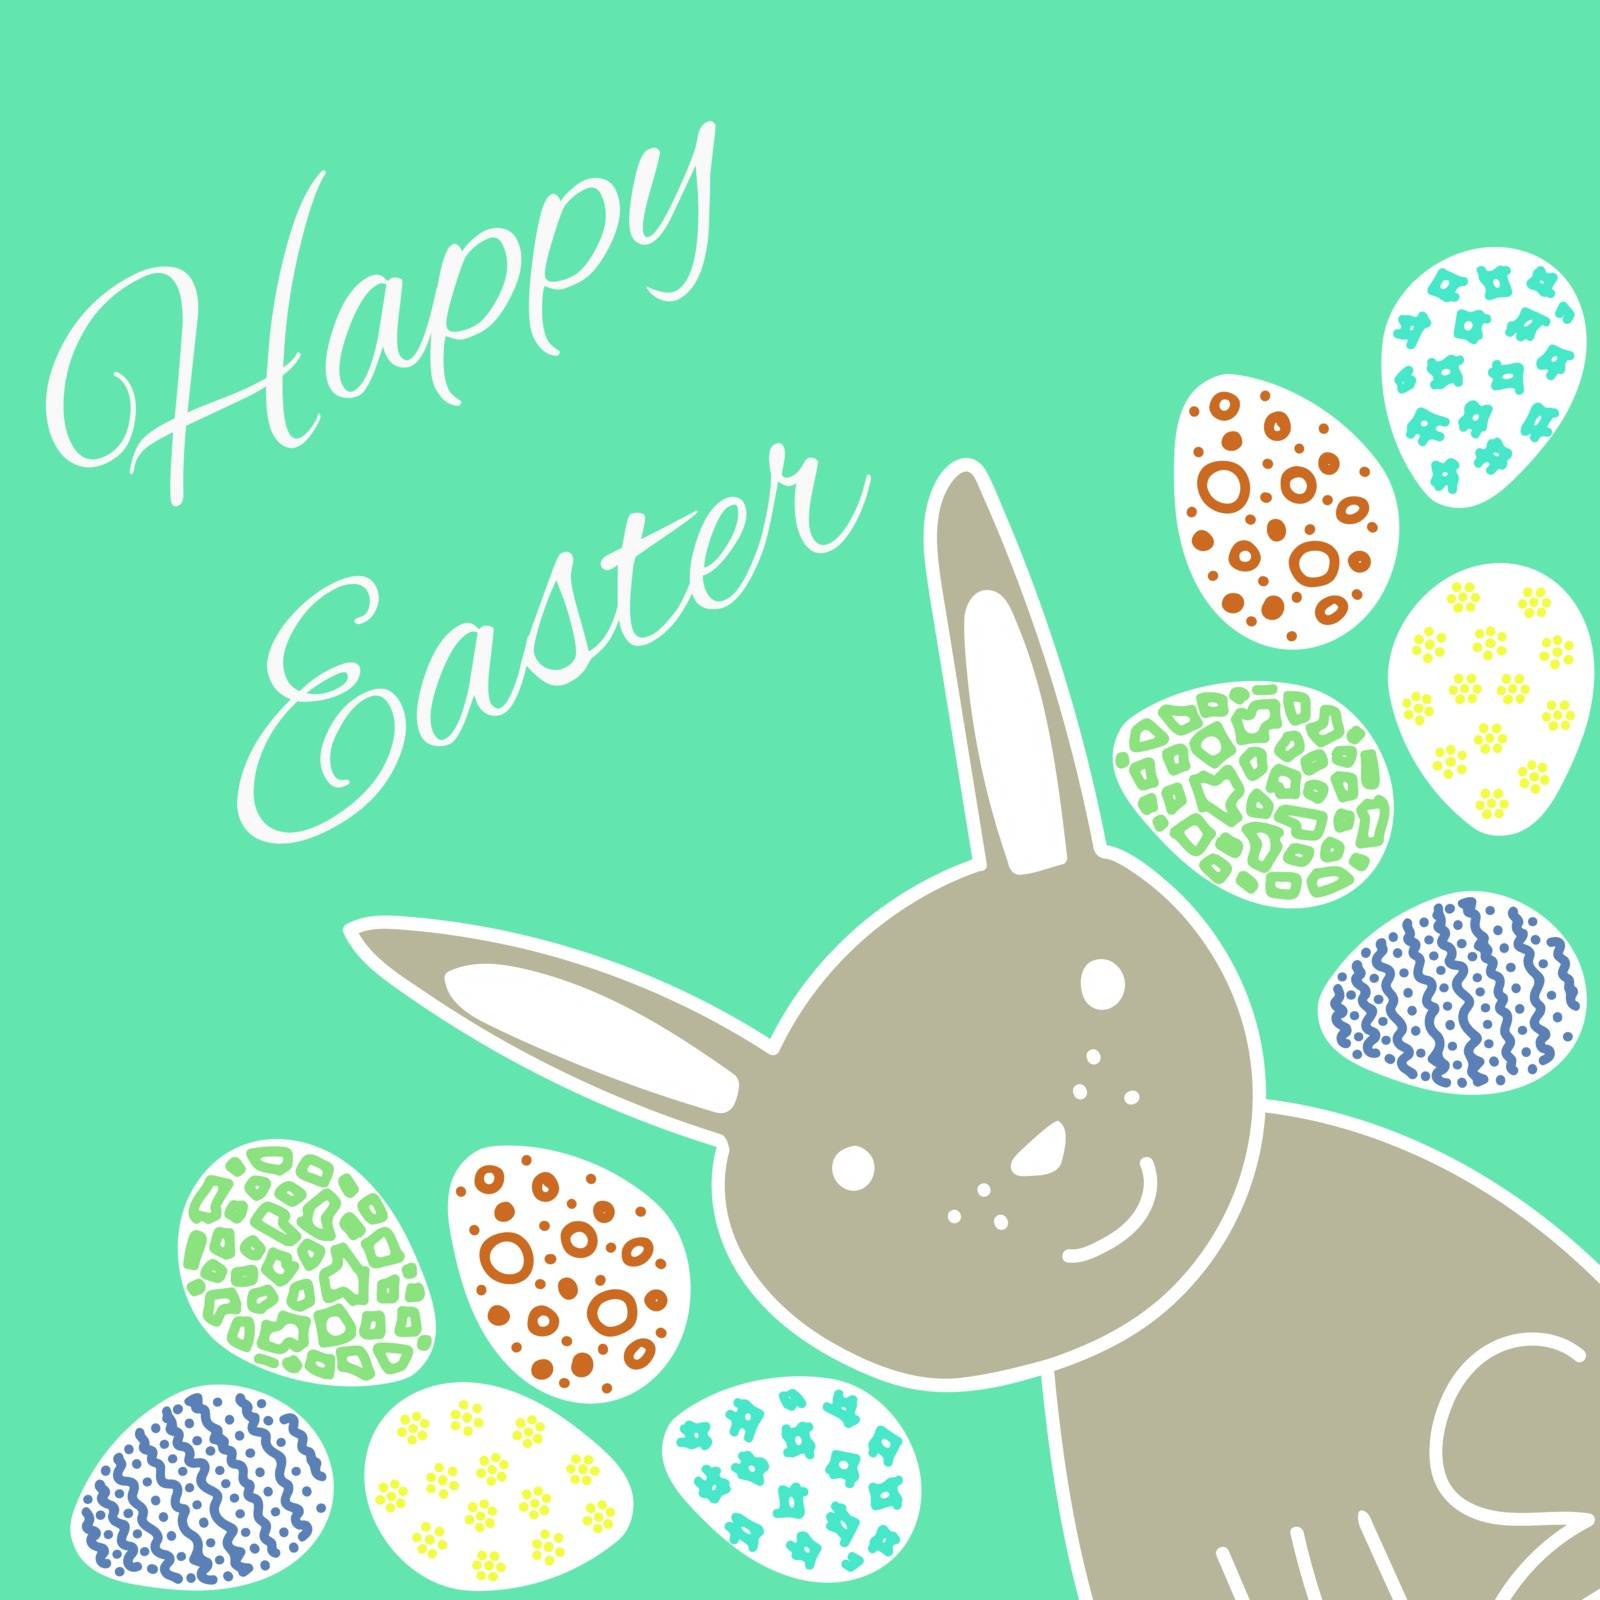 Happy Easter greeting card with cute rabbit and colored eggs